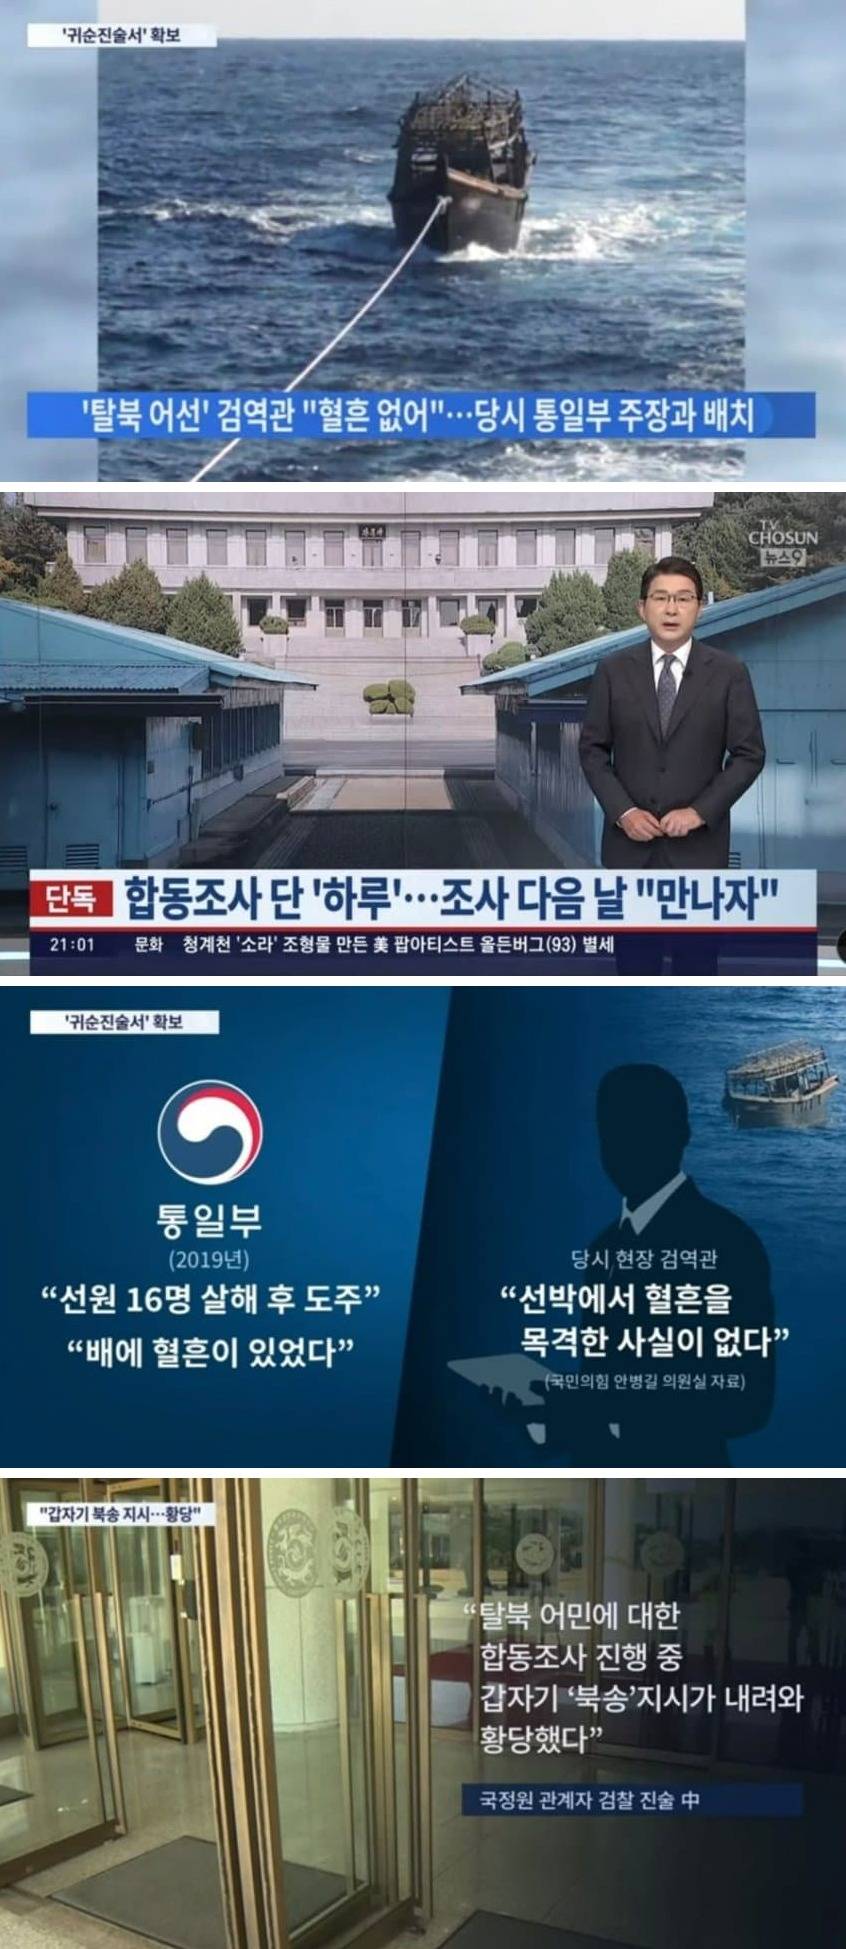 North Korean defectors forced to return to the North for truth battle